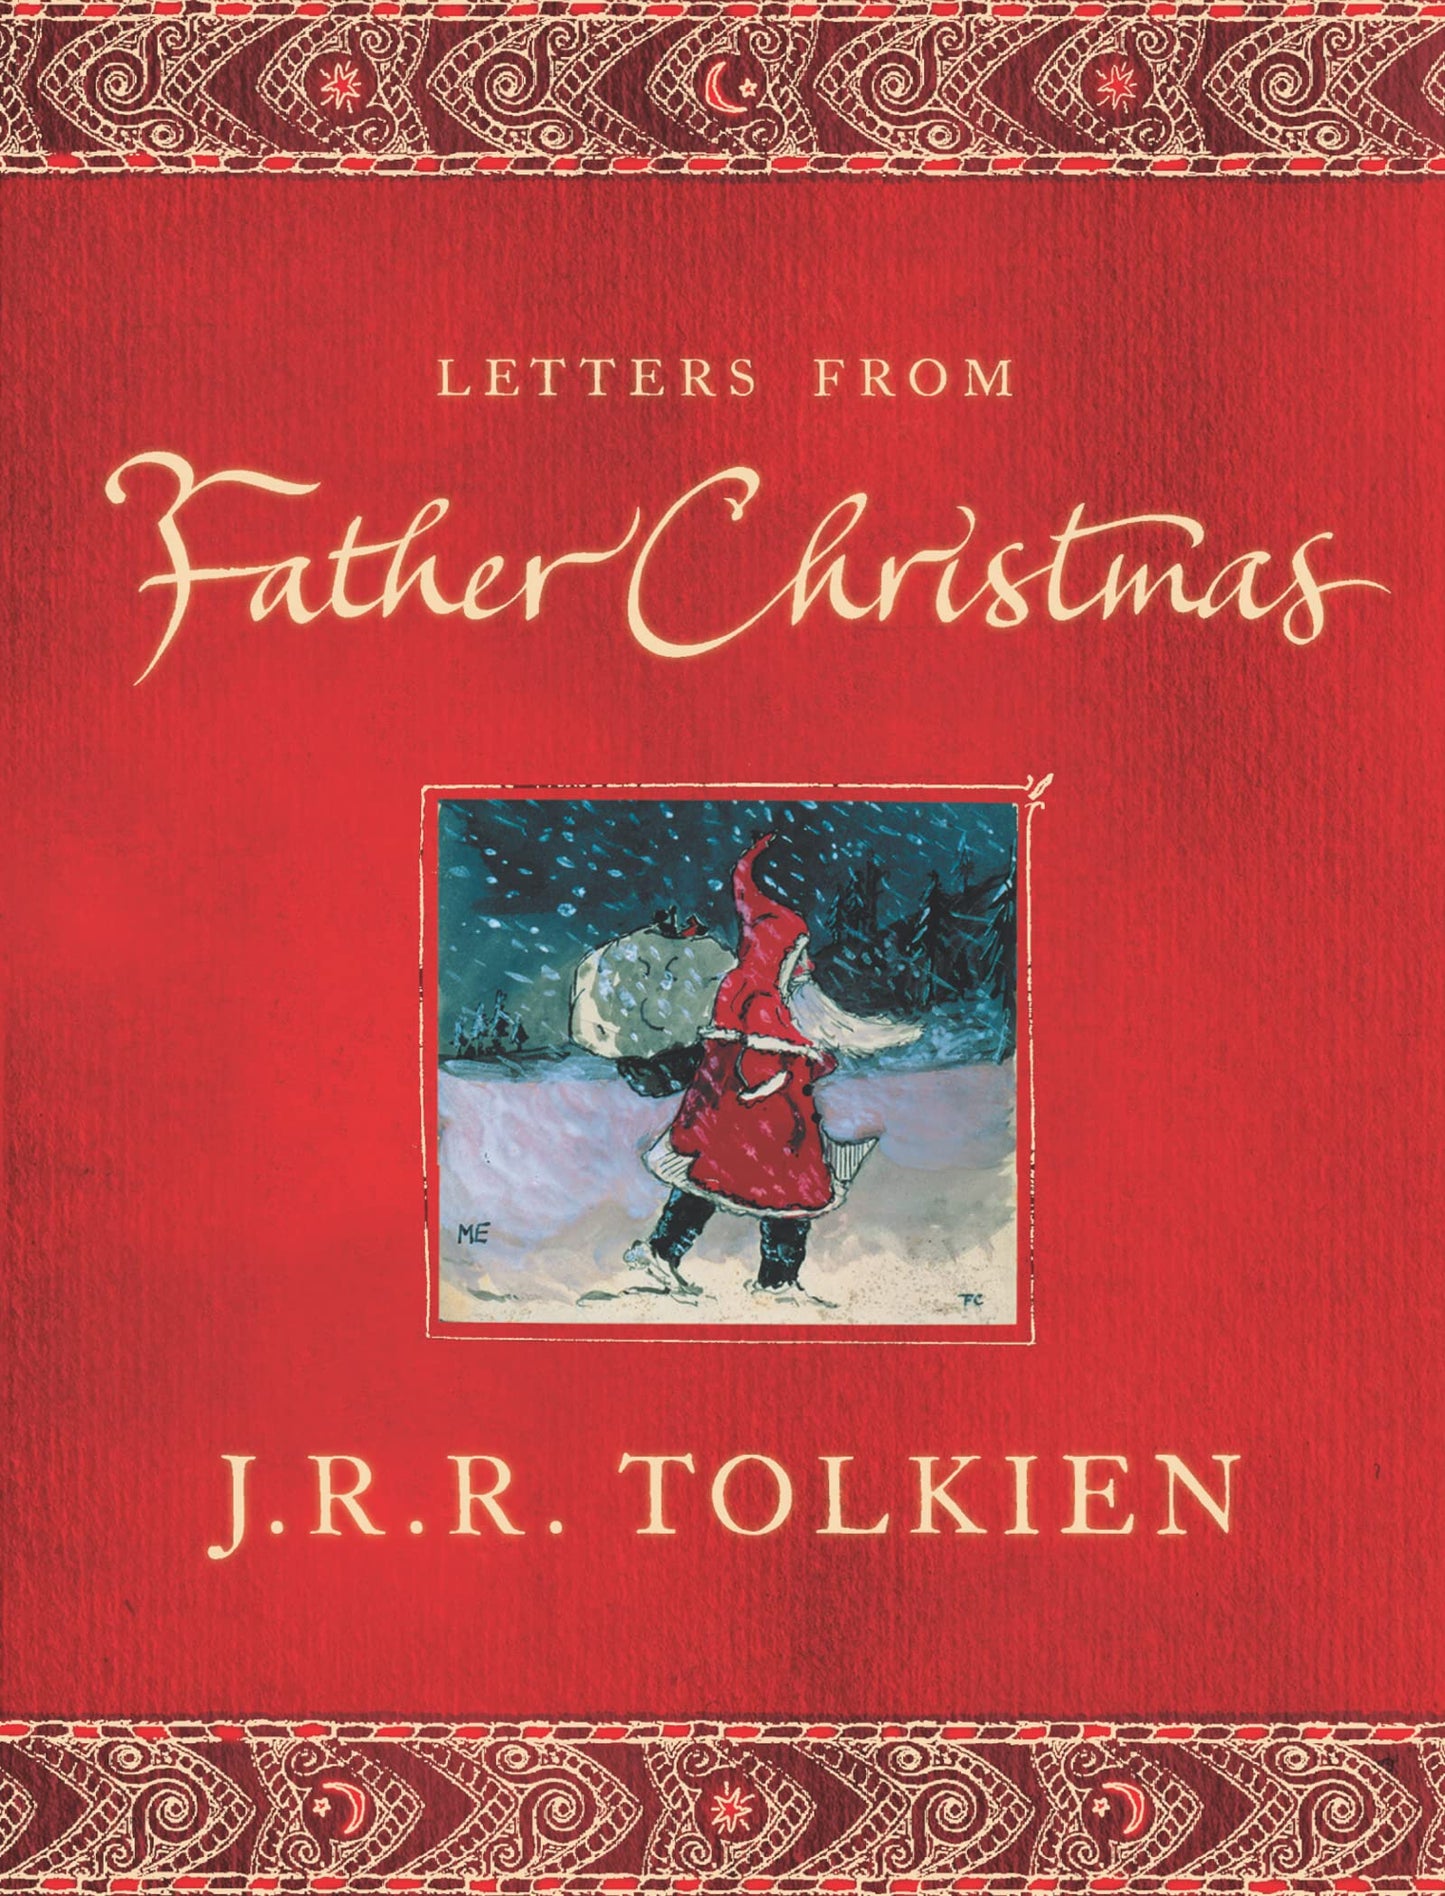 Letters from Father Christmas (Tolkien - paperback)